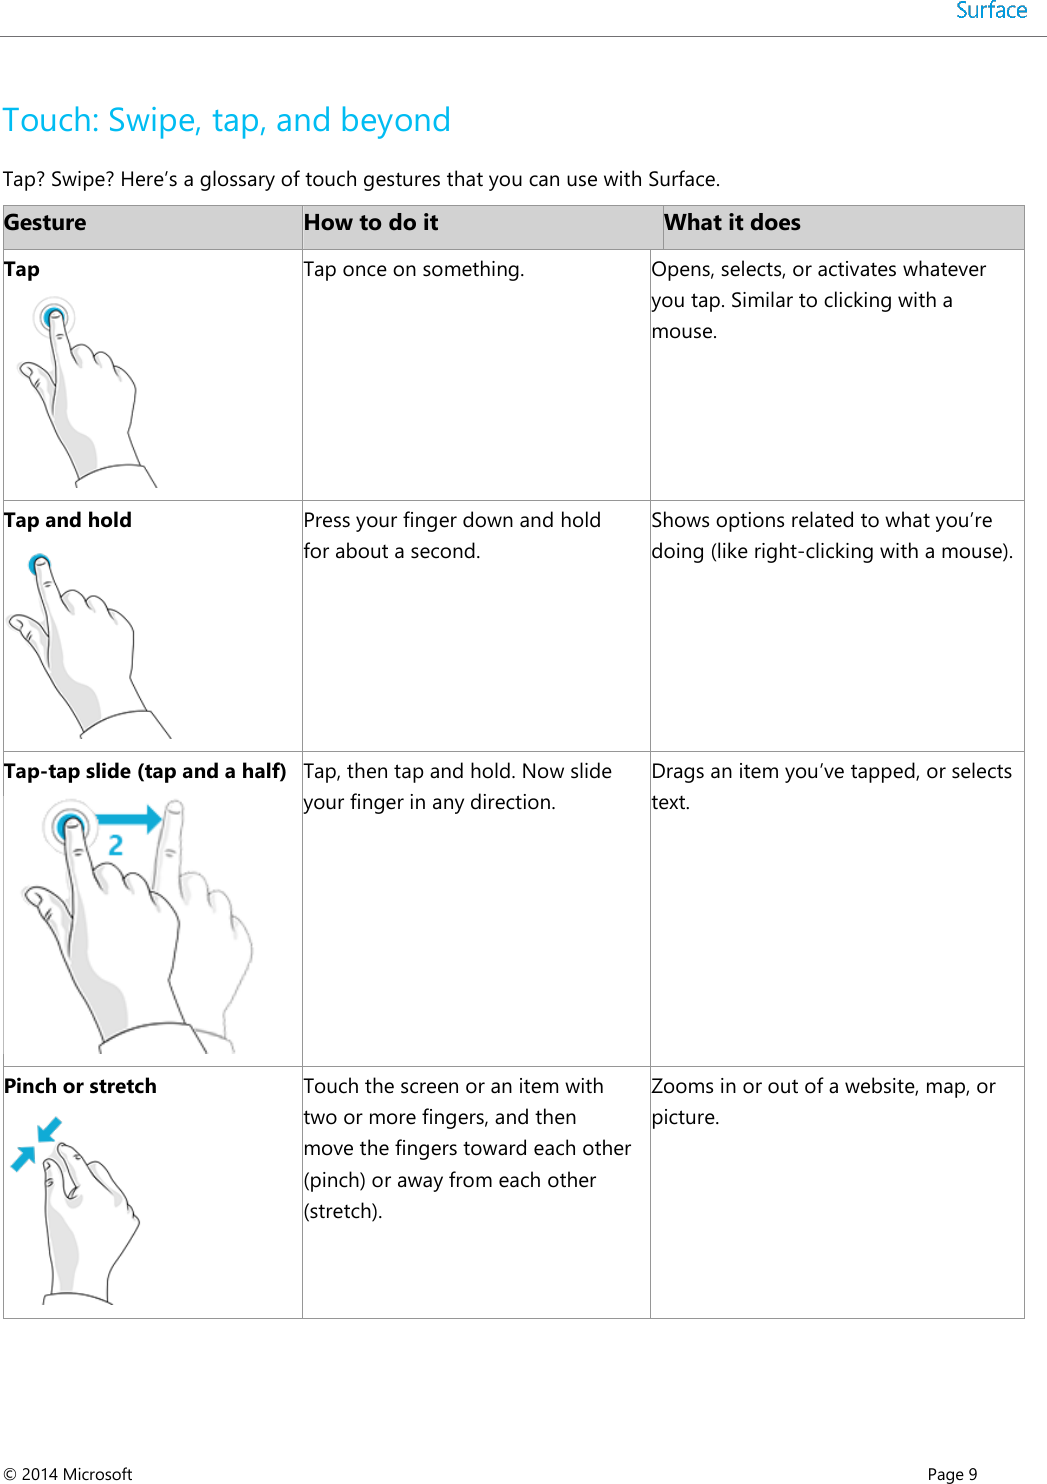  © 2014 Microsoft      Page 9  Touch: Swipe, tap, and beyond Tap? Swipe? Here’s a glossary of touch gestures that you can use with Surface. Gesture How to do it What it does Tap  Tap once on something. Opens, selects, or activates whatever you tap. Similar to clicking with a mouse. Tap and hold  Press your finger down and hold for about a second. Shows options related to what you’re doing (like right-clicking with a mouse). Tap-tap slide (tap and a half)  Tap, then tap and hold. Now slide your finger in any direction. Drags an item you’ve tapped, or selects text. Pinch or stretch   Touch the screen or an item with two or more fingers, and then move the fingers toward each other (pinch) or away from each other (stretch). Zooms in or out of a website, map, or picture. 